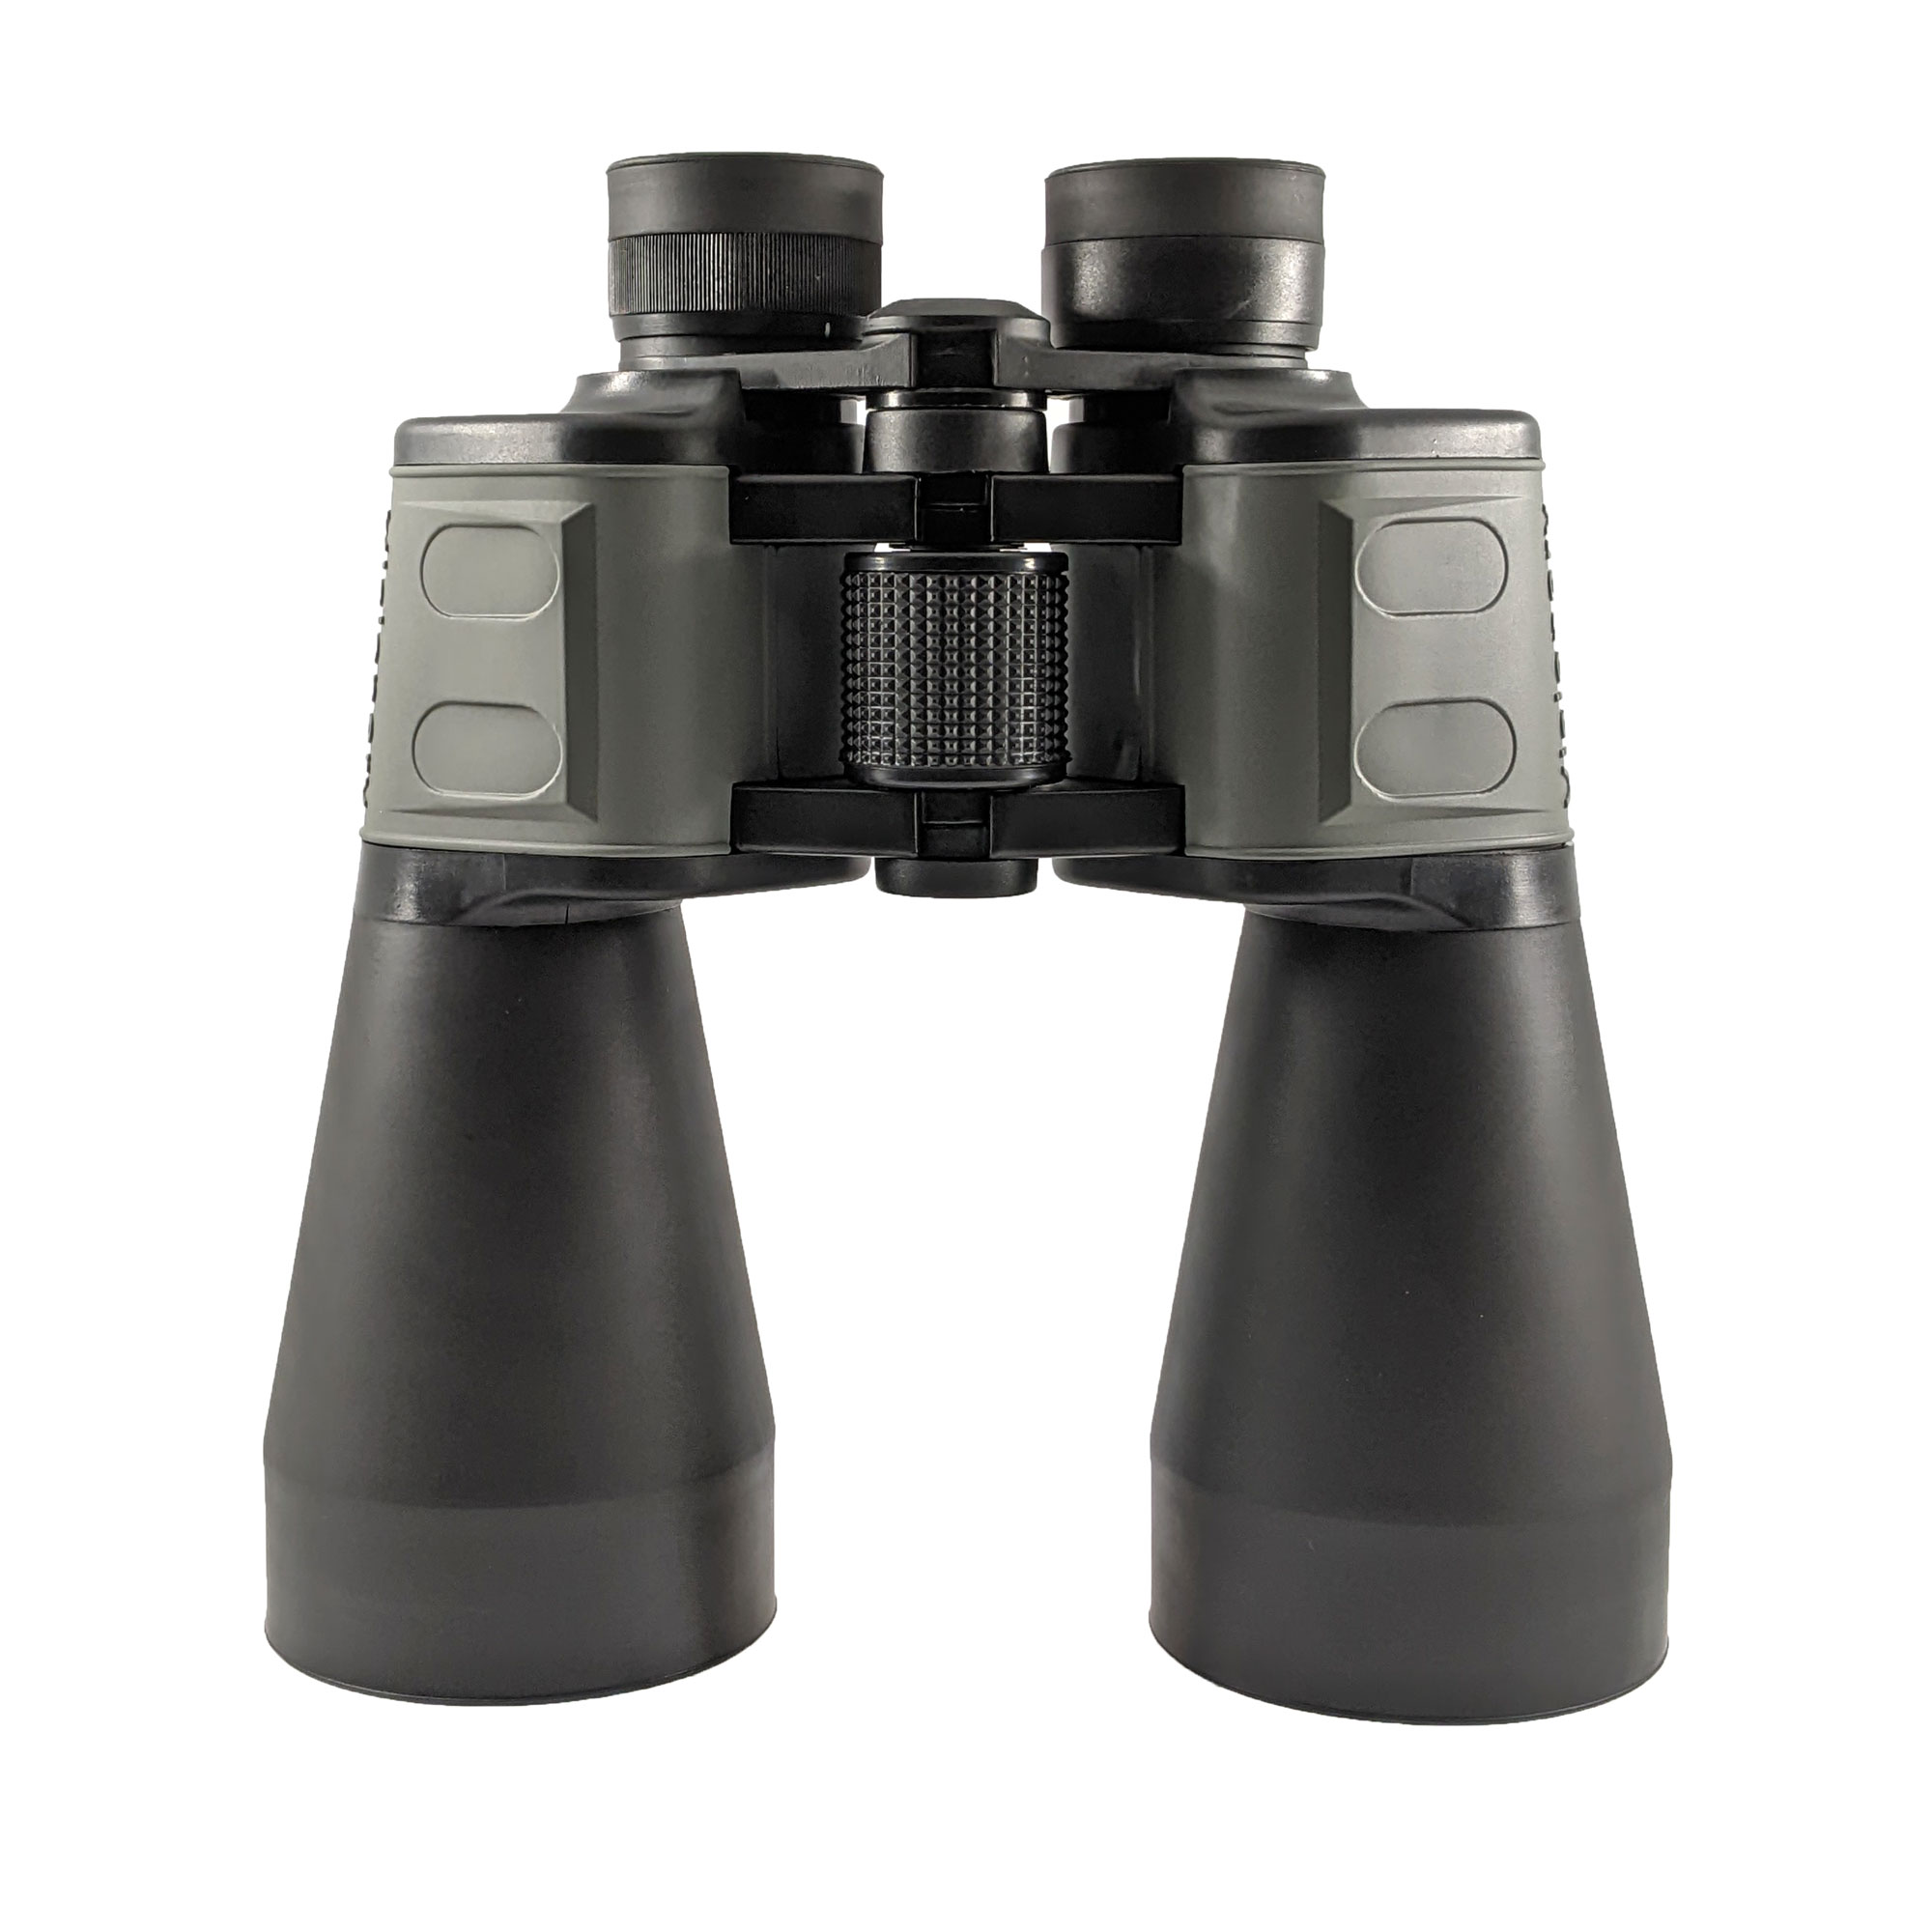 VISIONARY CLASSIC 20x60 BINOCULARS VERY POWERFUL AIRCRAFT SHIPS OBSERVATION 